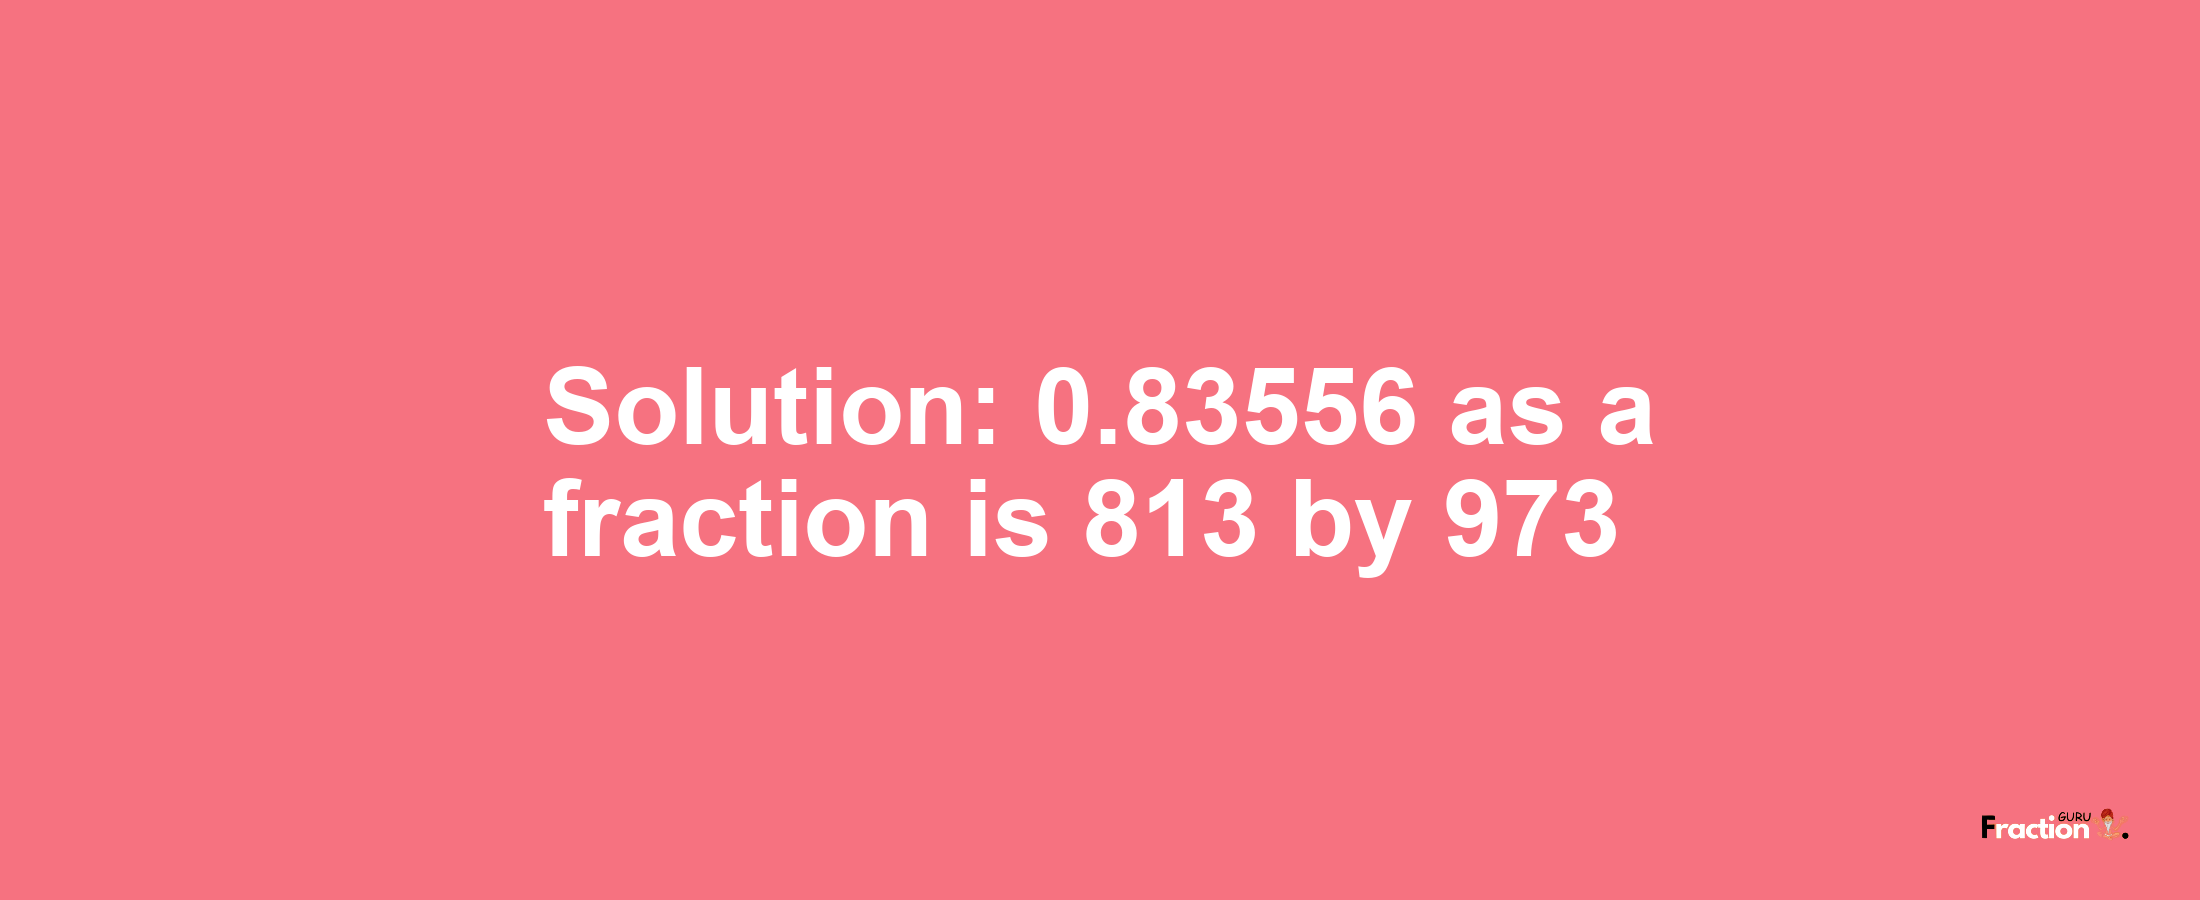 Solution:0.83556 as a fraction is 813/973